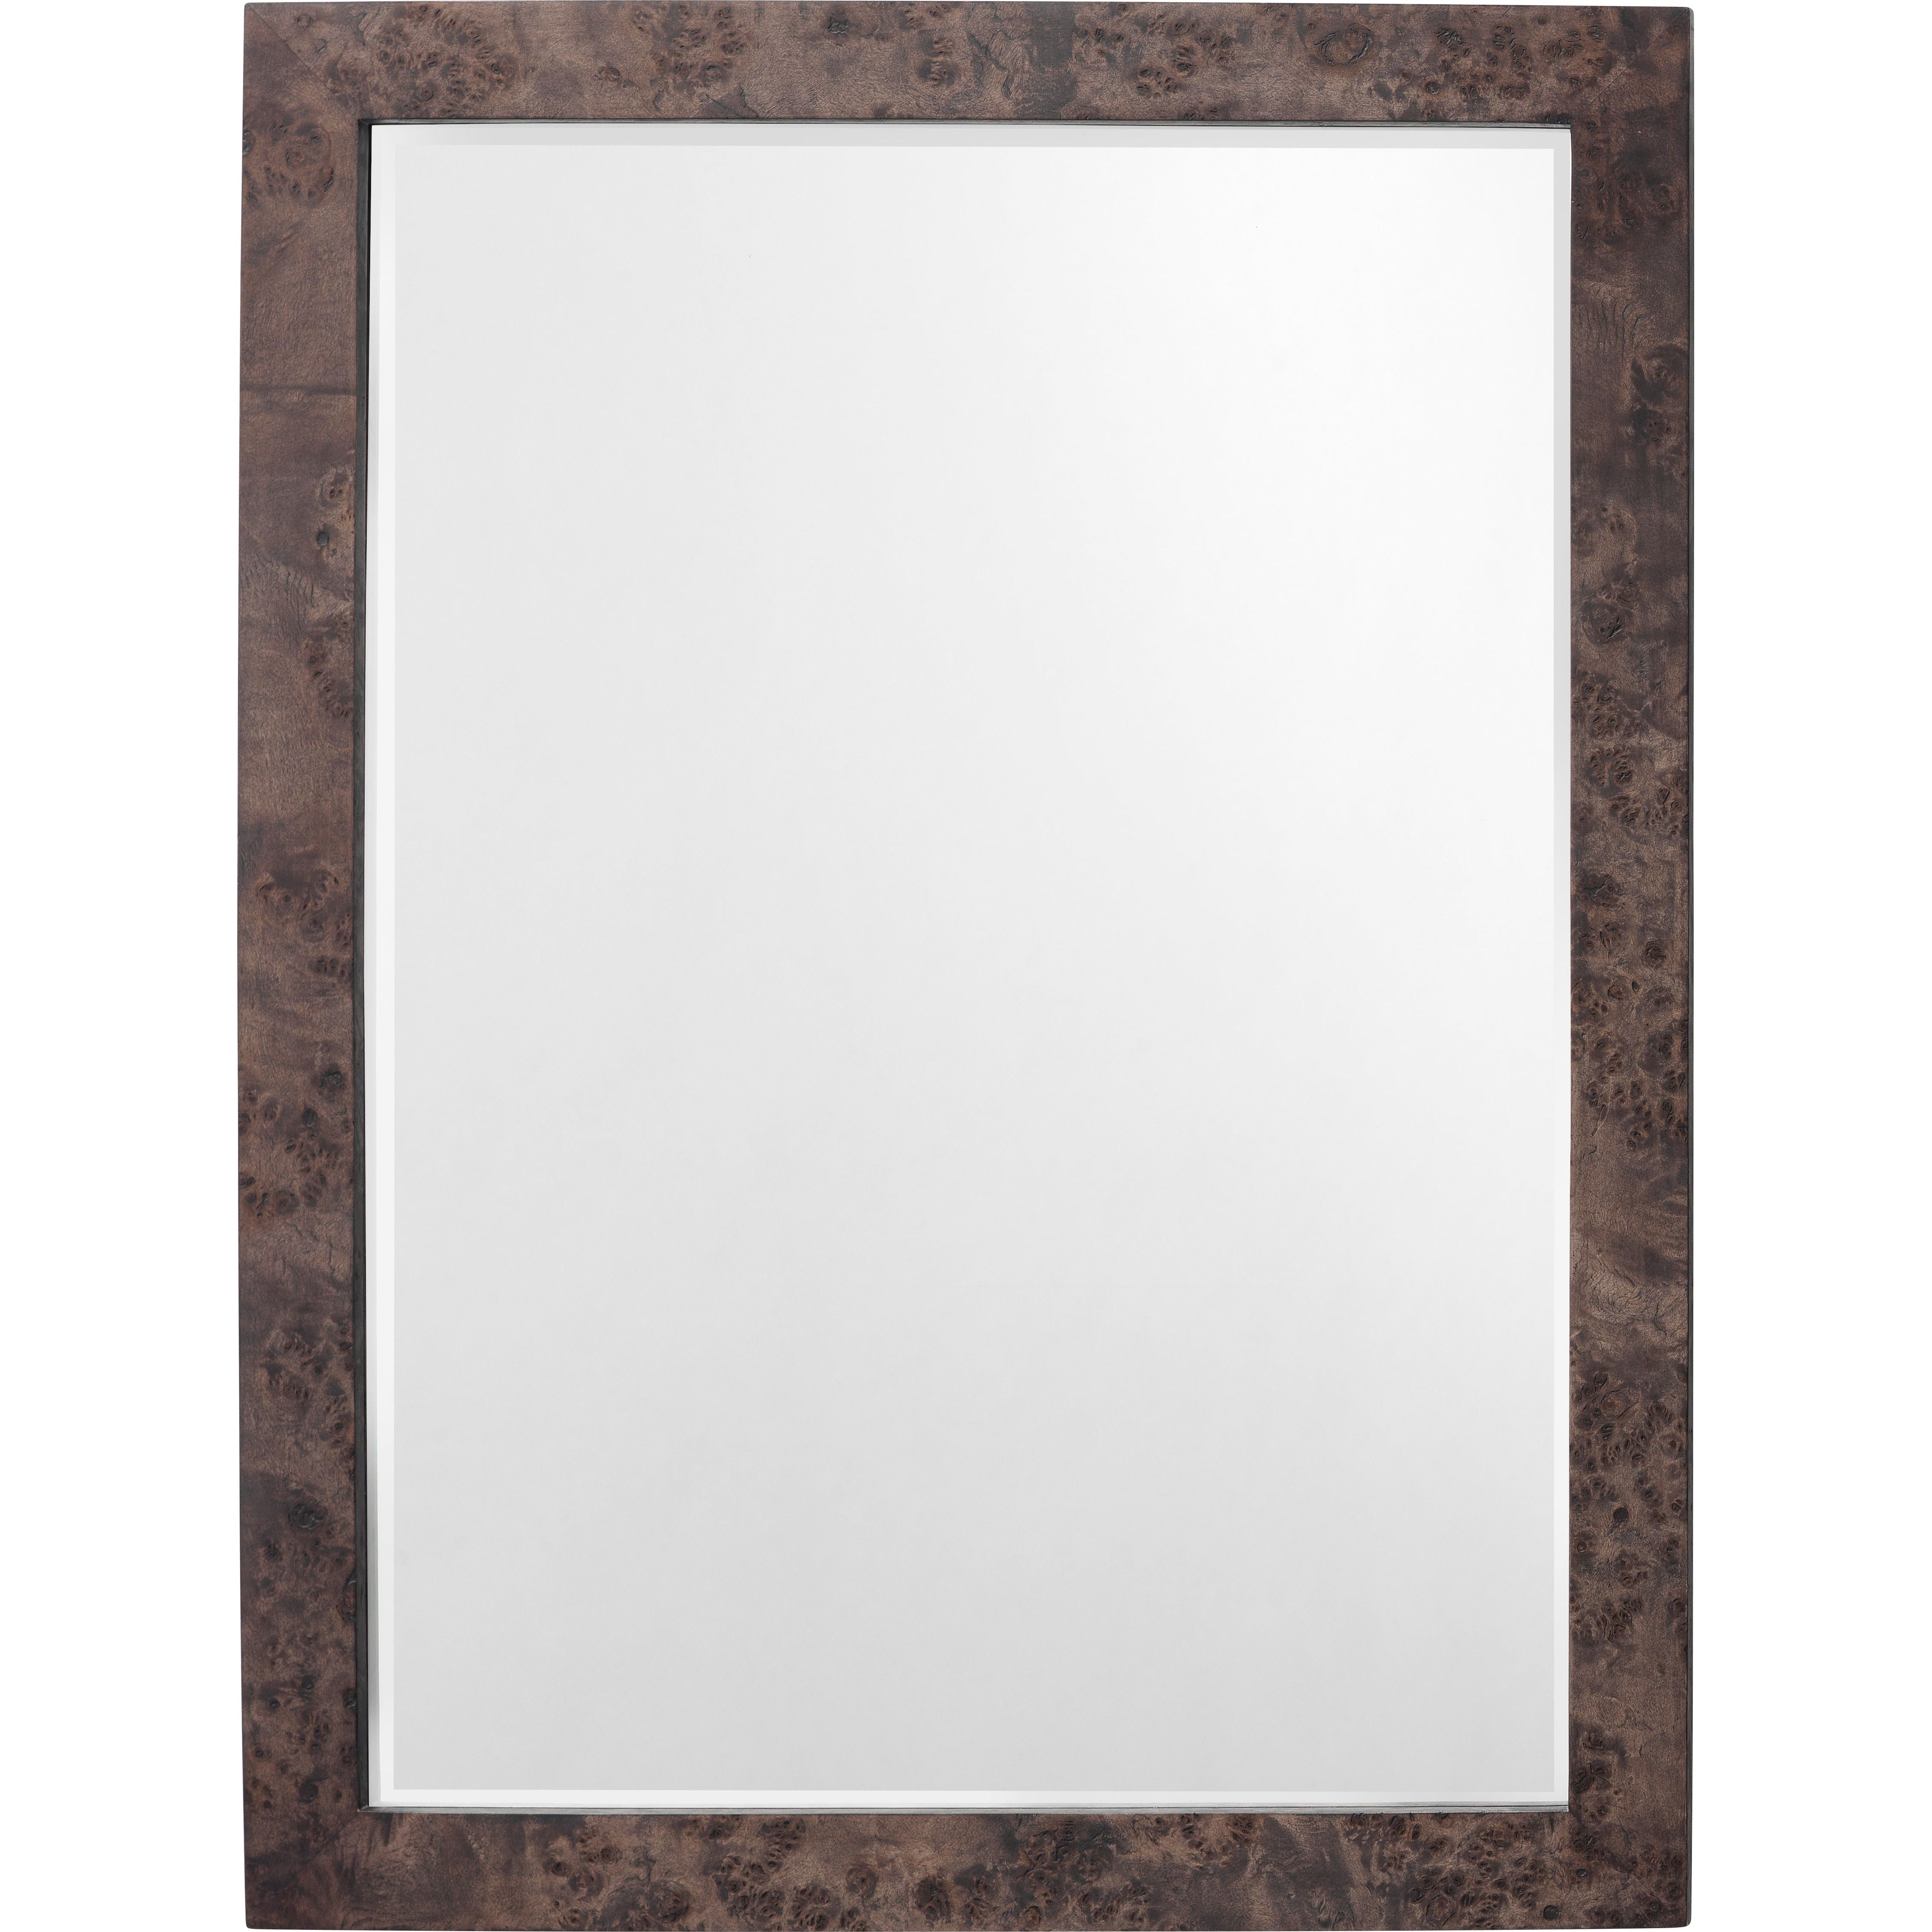 Jamie Young Company - 6CHAN-RECTCH - Chandler Rectangle Mirror - Chandler - Charcoal